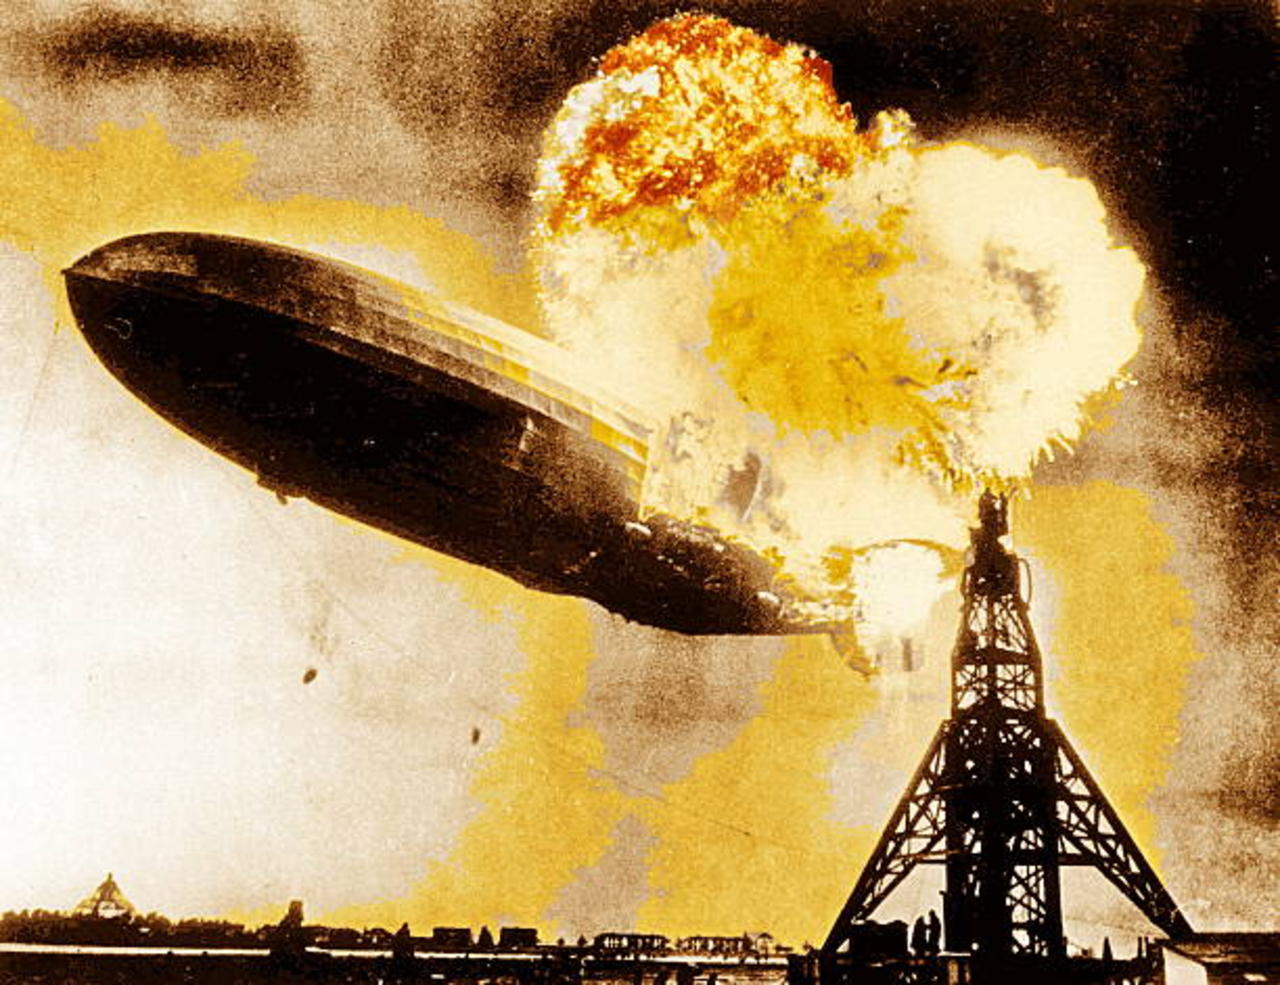 This Day in History: The Hindenburg Disaster (Saturday, May 6th)